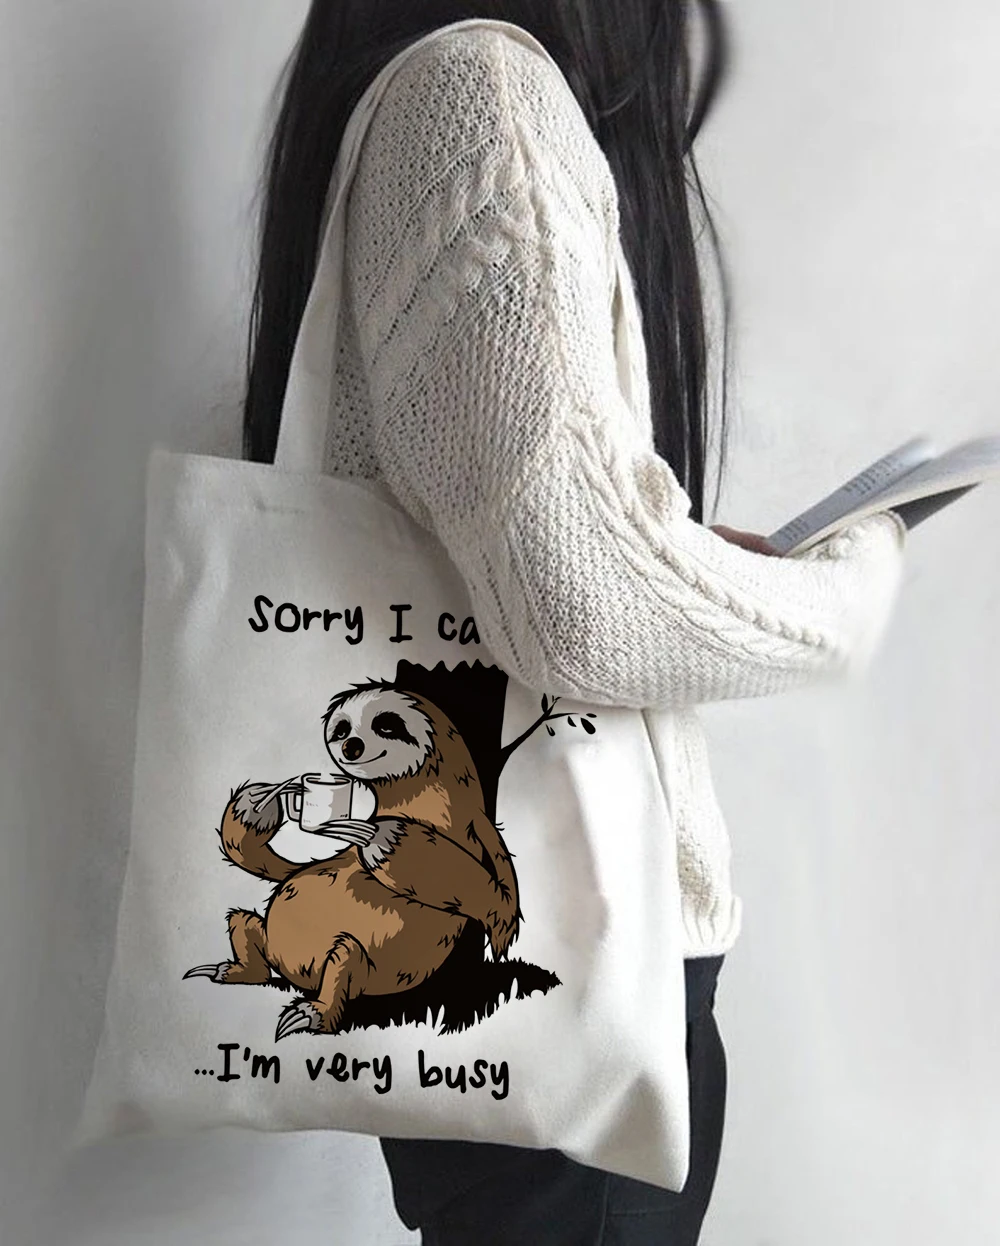 

Women Cartoon Sloth Print Shopping Bag Tote Eco Handbag Tumblr Graphic Students College Style Simple Casual Shoulder Bags